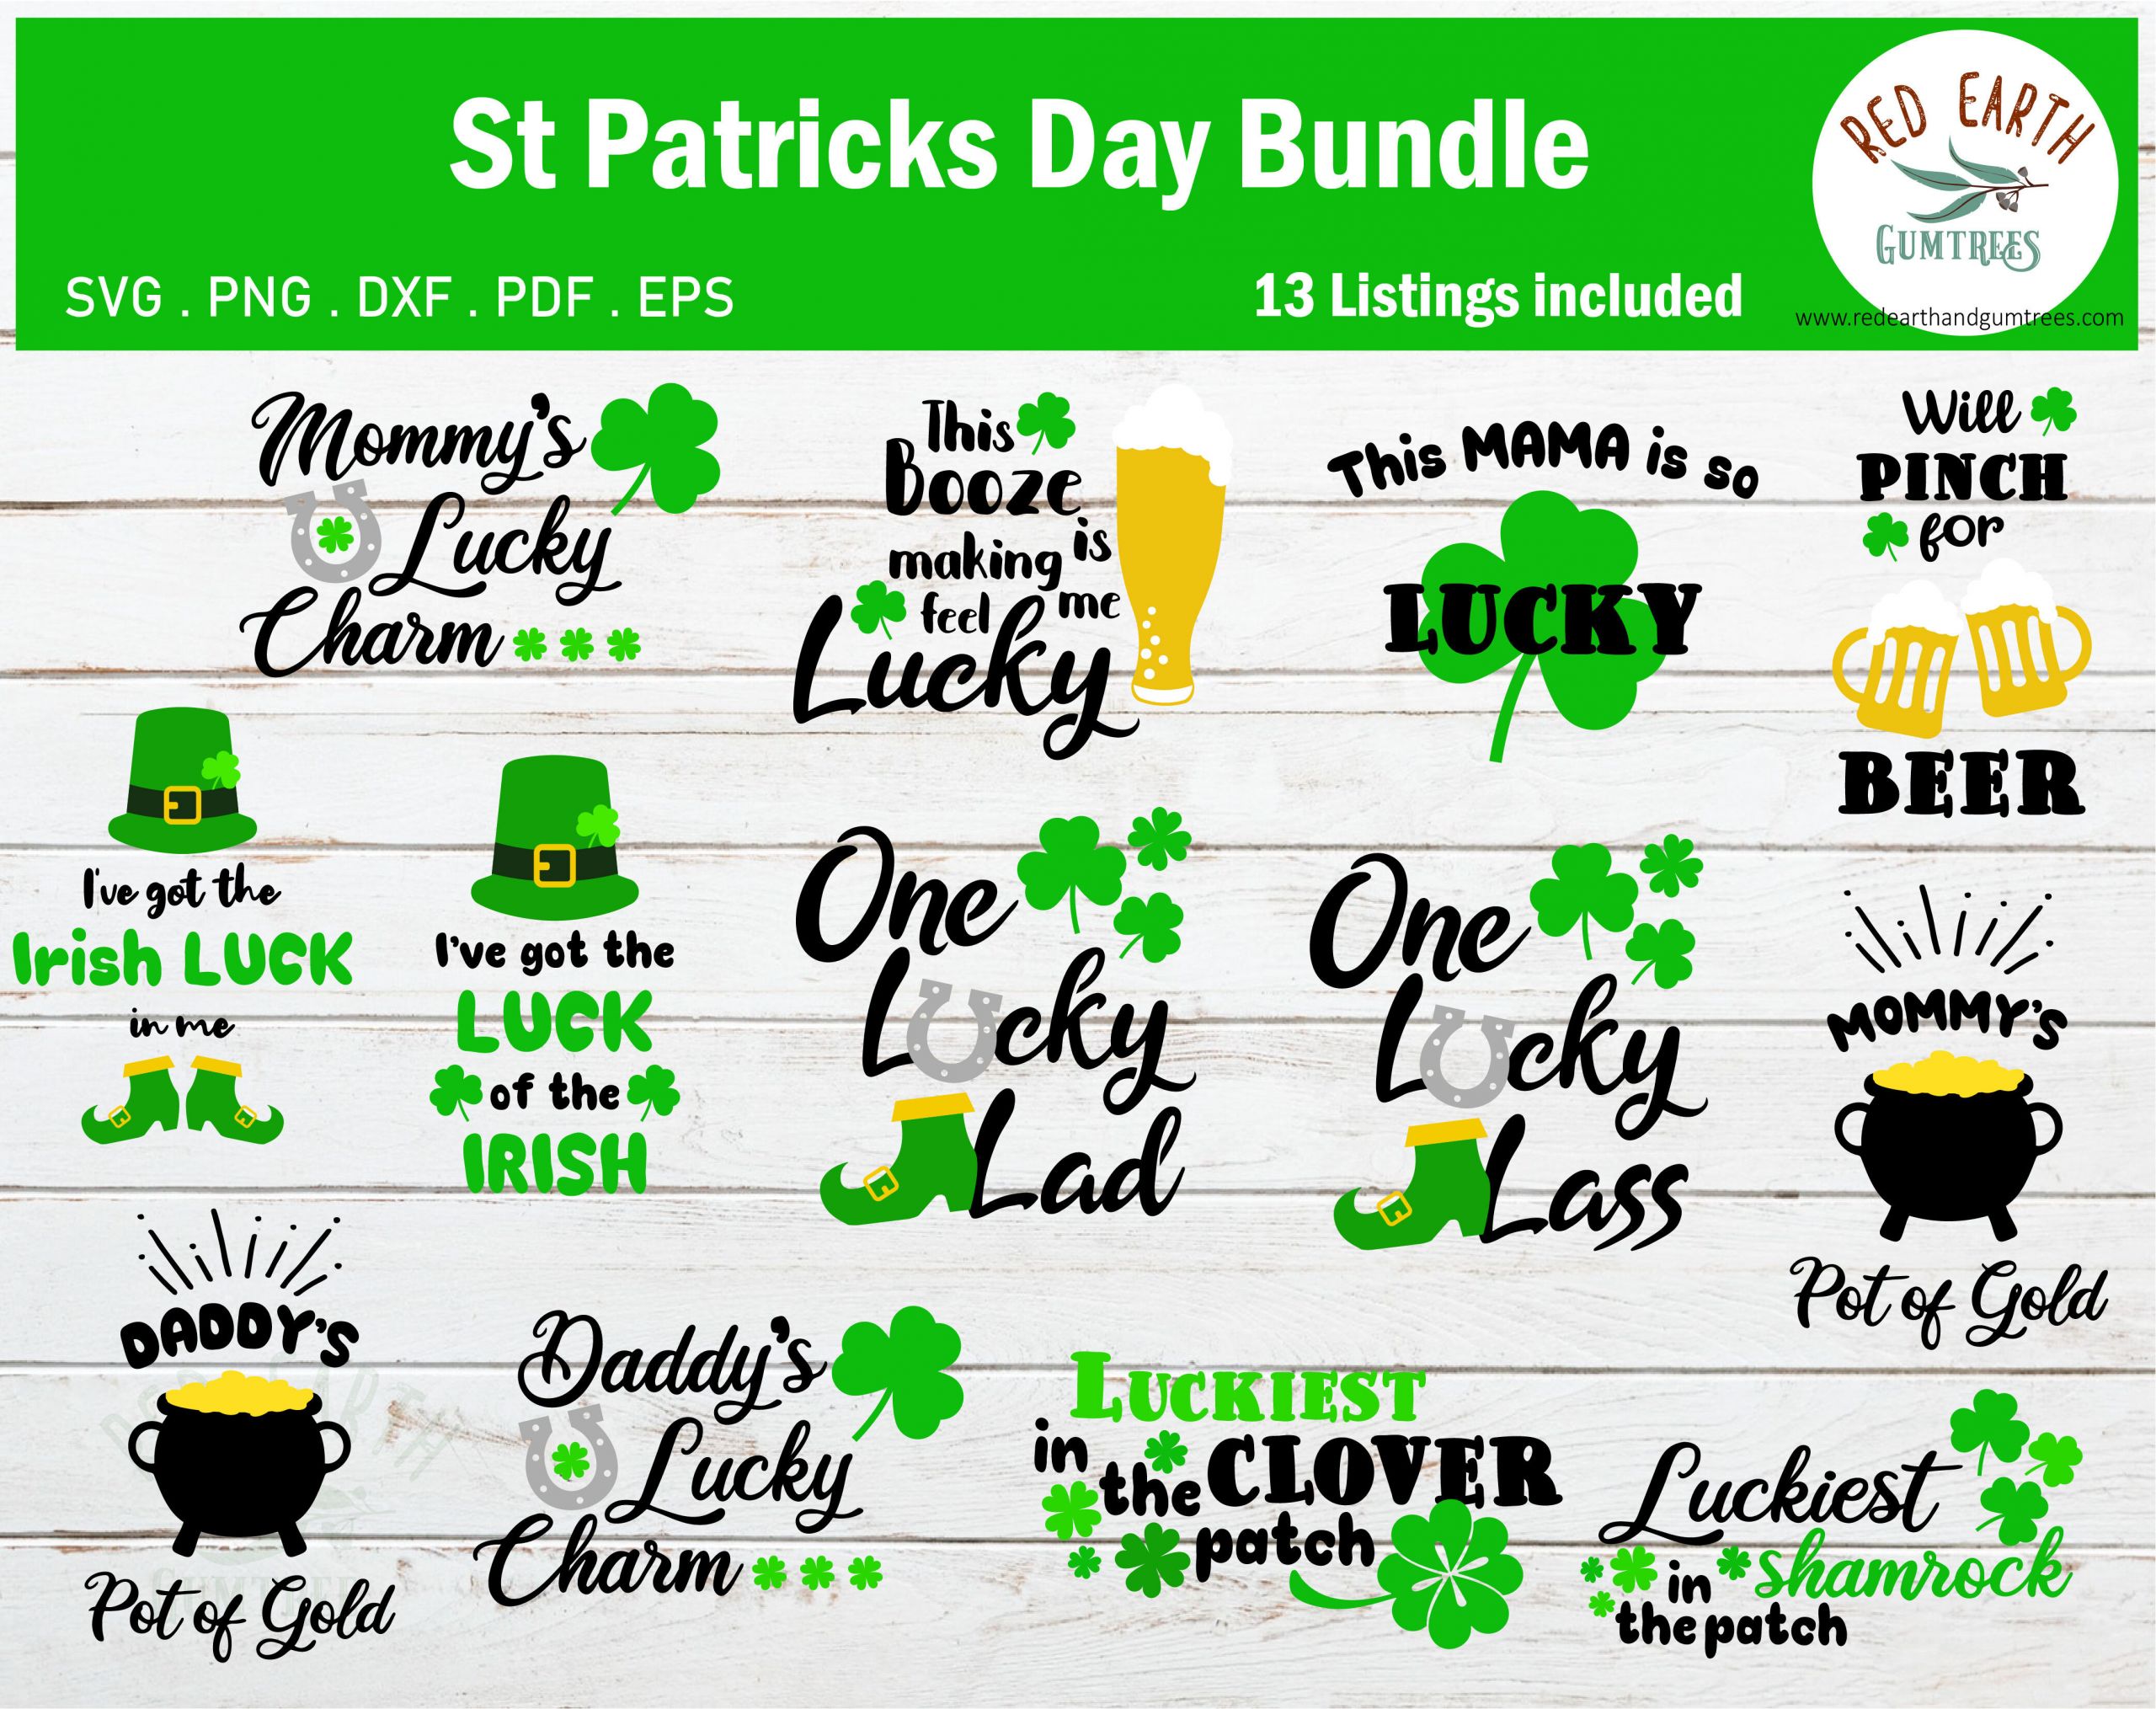 St Patrick's Day Quotes And Sayings
 Funny St Patrick s day quotes and sayings SVG PNG DXF PDF